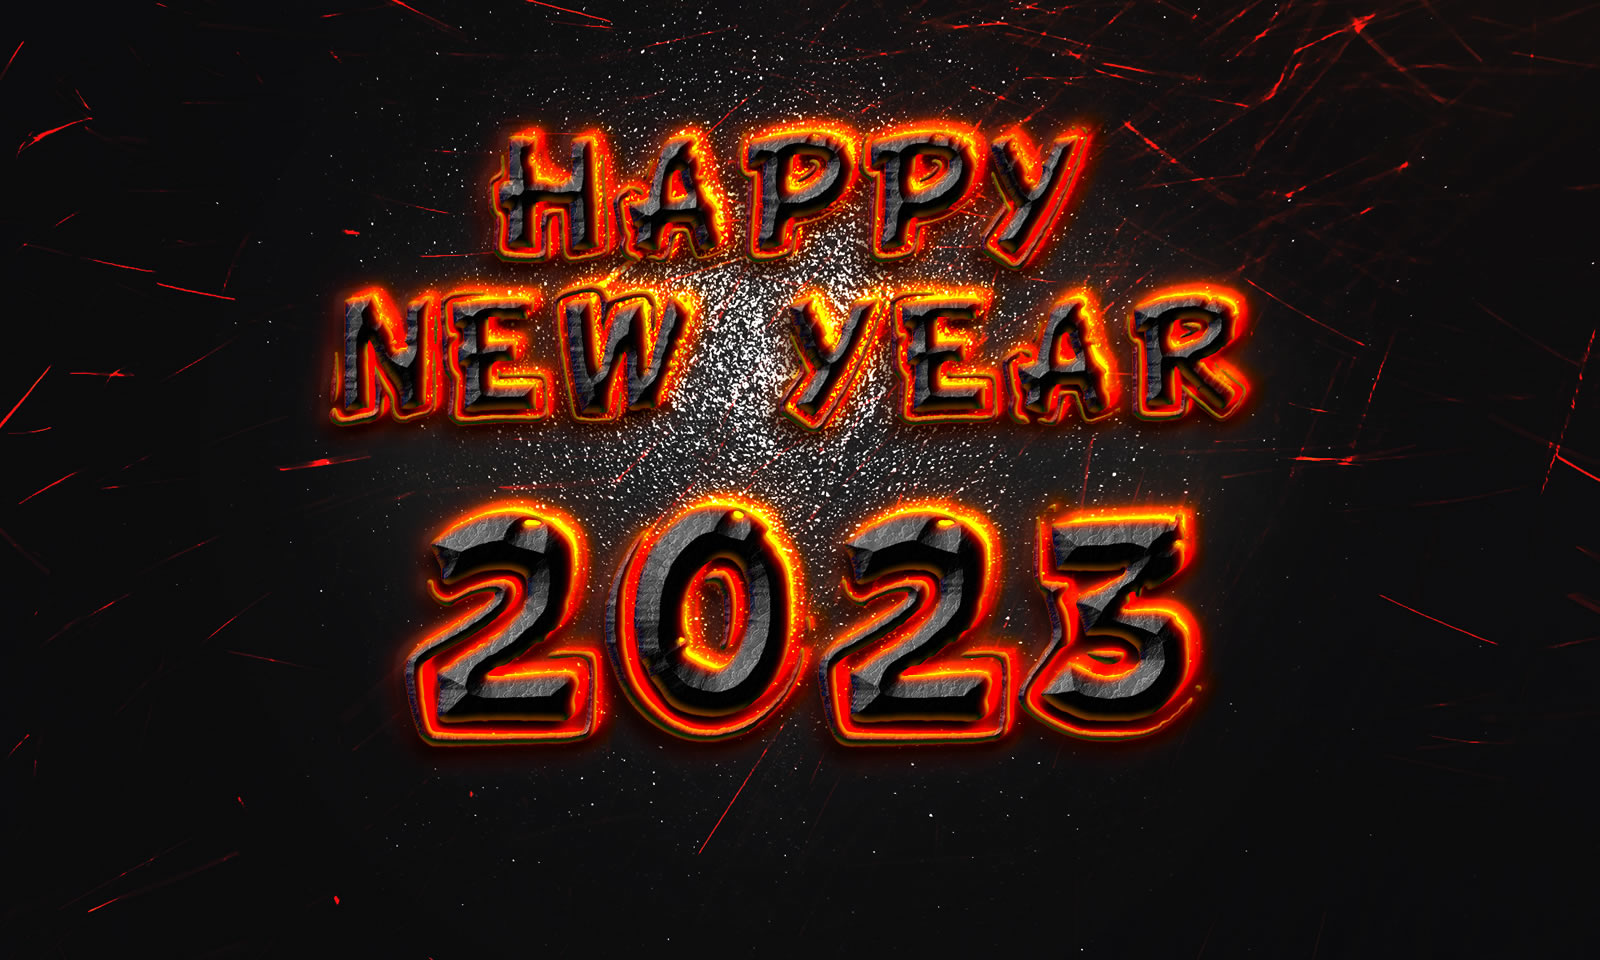 2023 wallpaper with molten metal effect. HD image wishes 2023